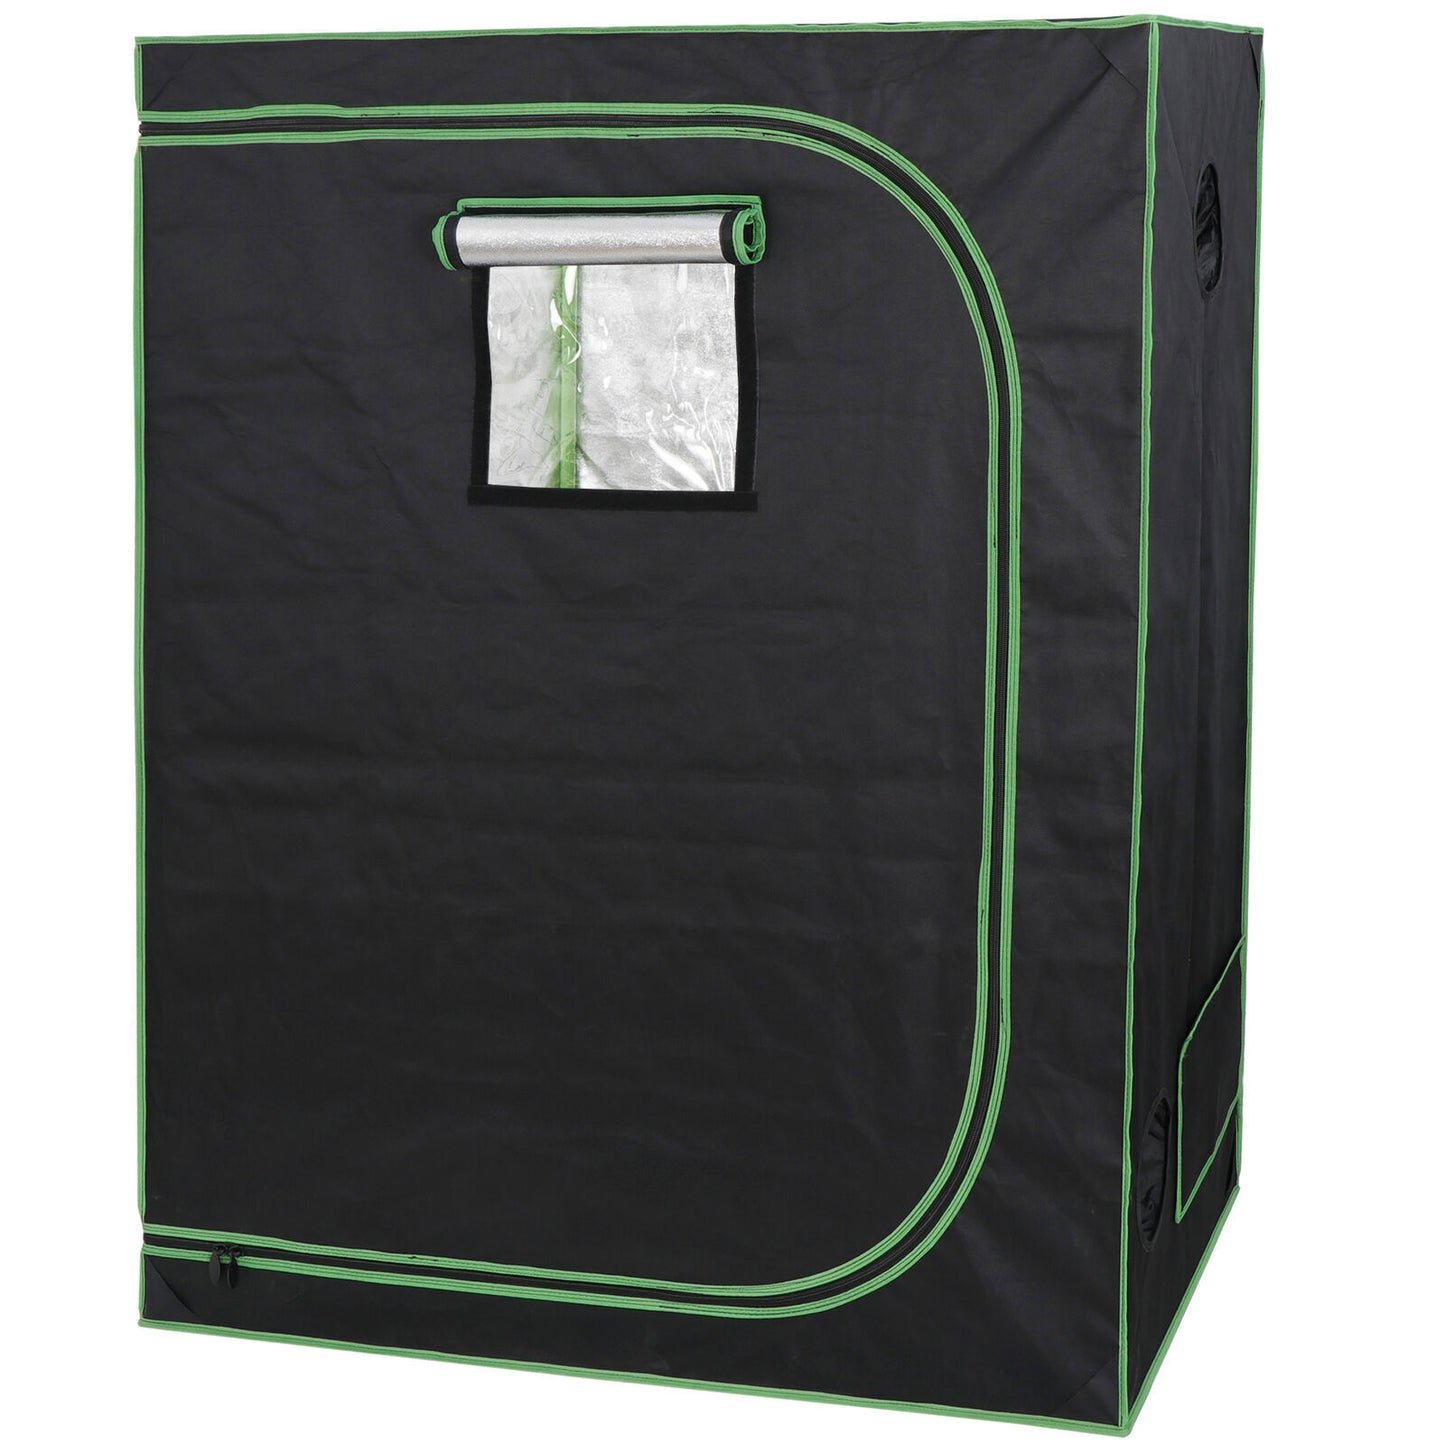 48"x24"x60" Grow Tent Mylar Hydroponic with Observation Window and Floor Tray